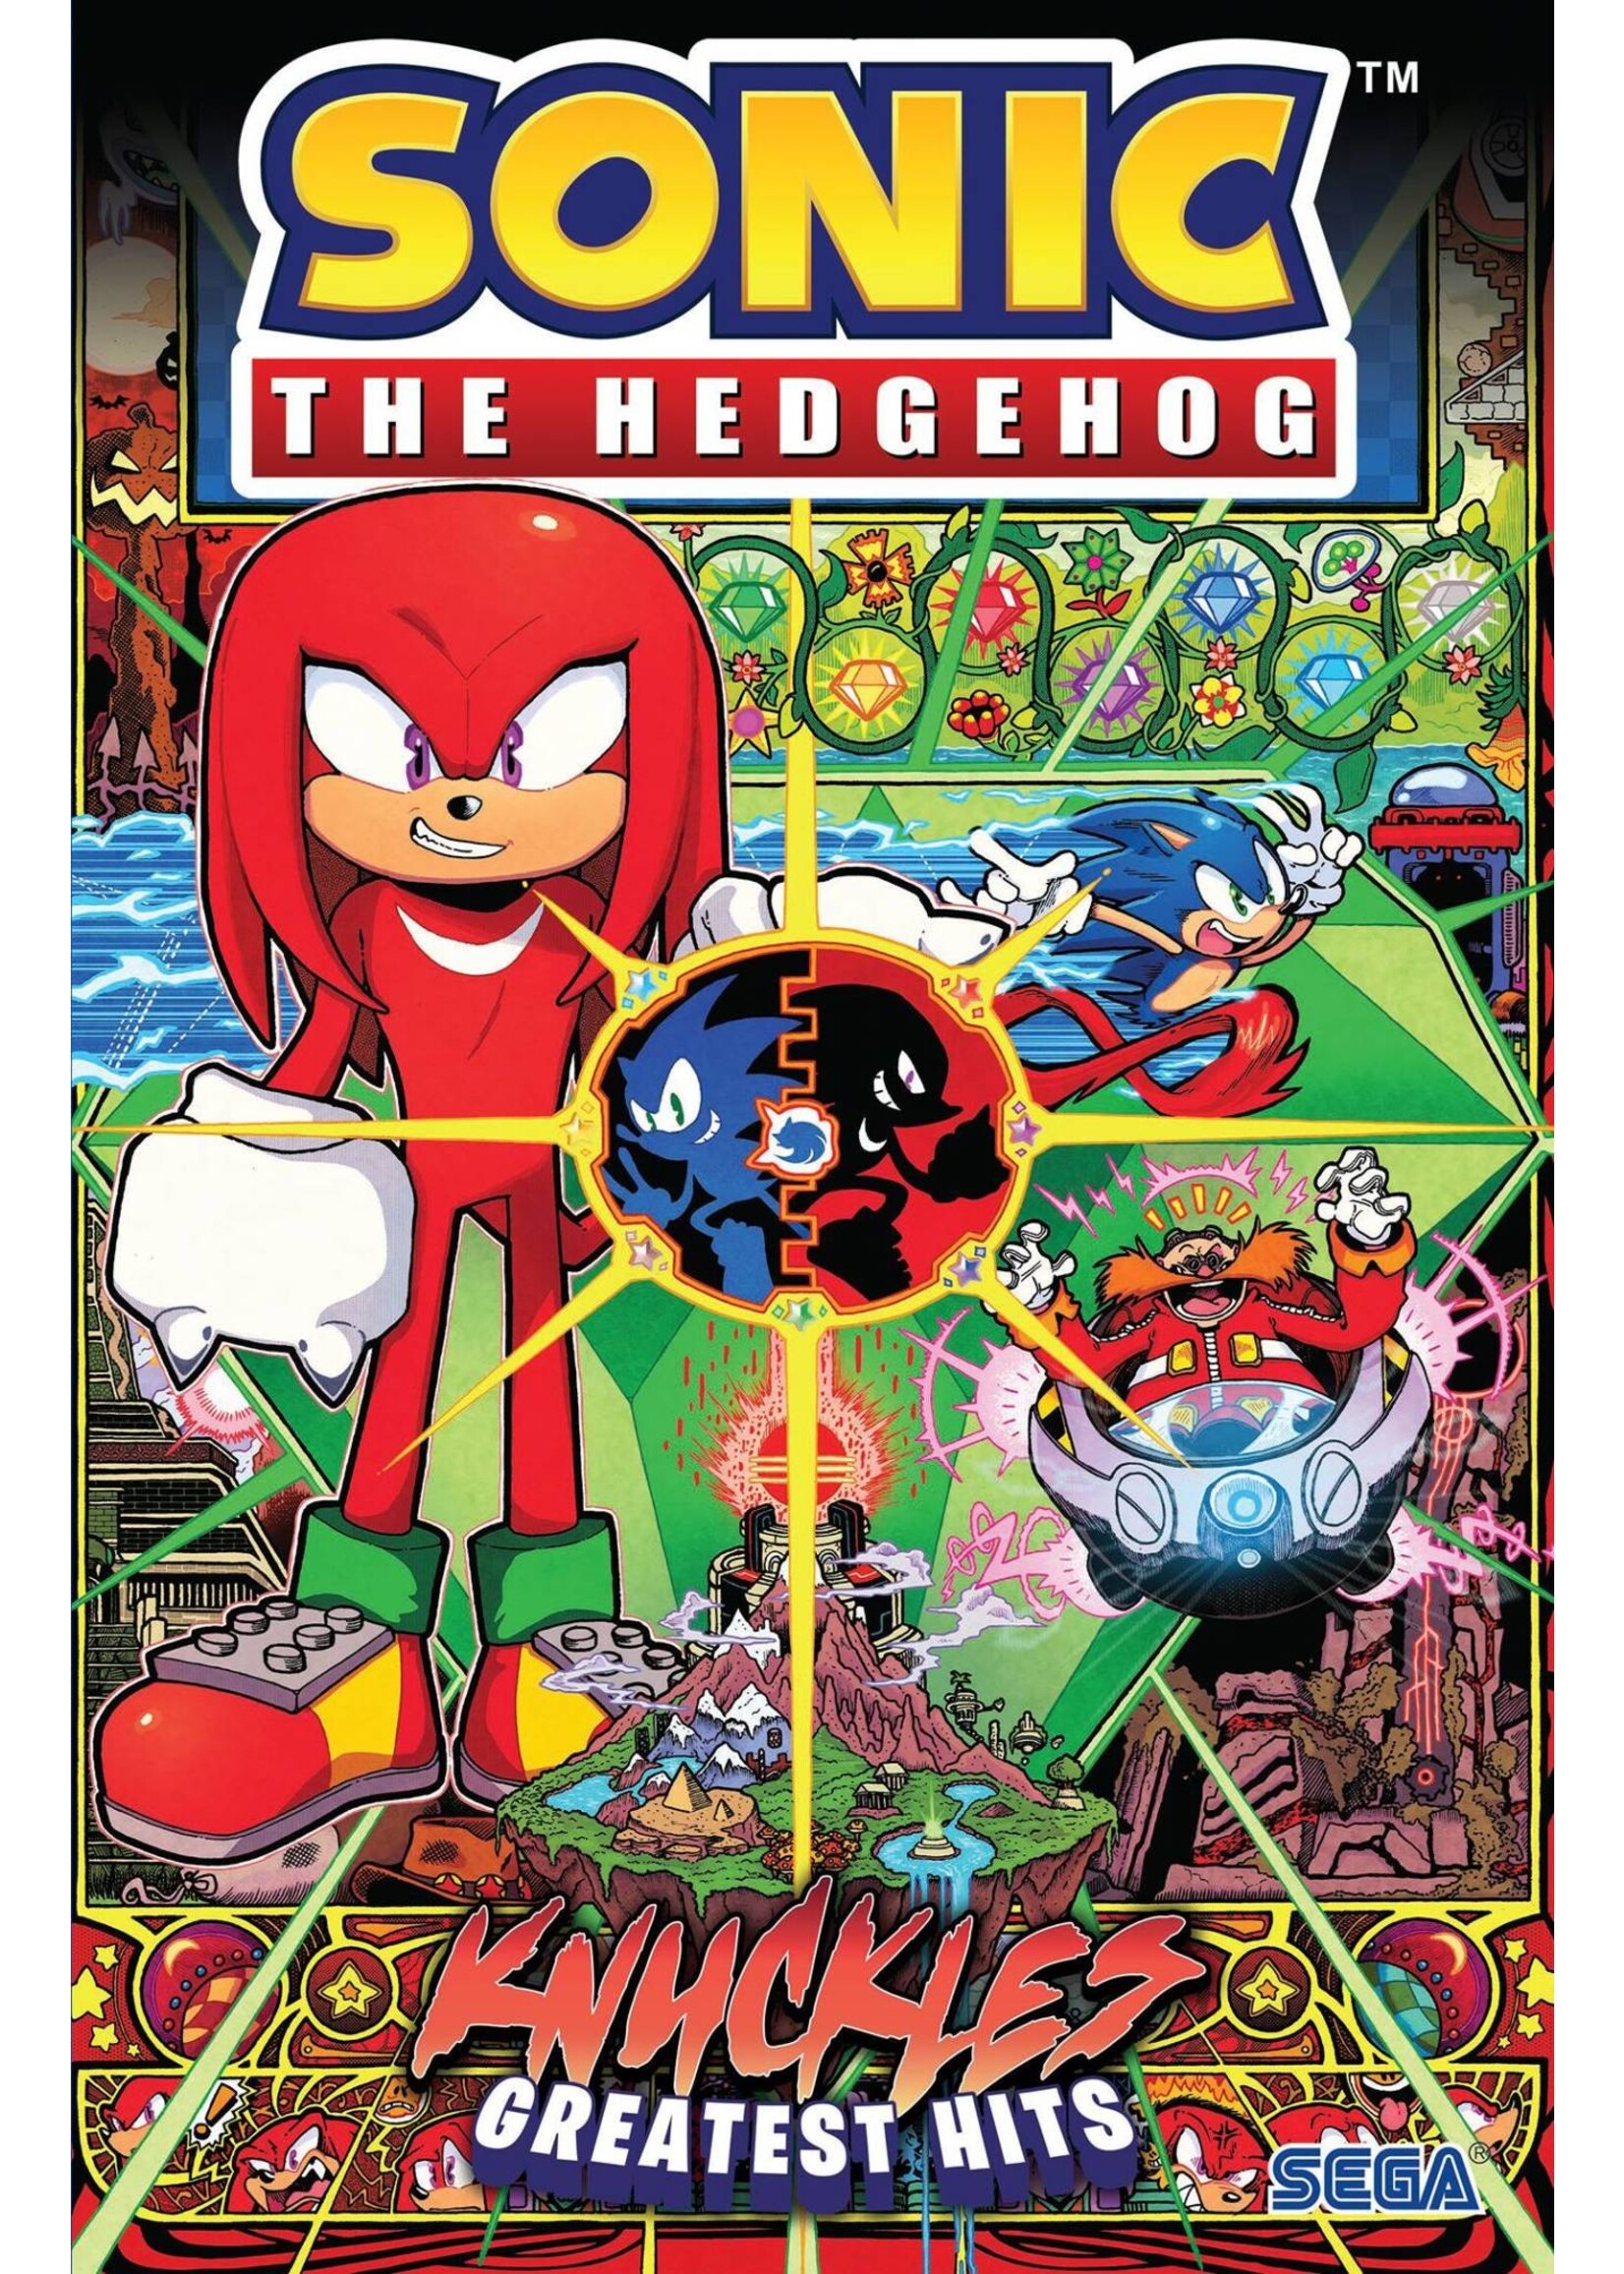 IDW PUBLISHING SONIC THE HEDGEHOG KNUCKLES GREATEST HITS TP